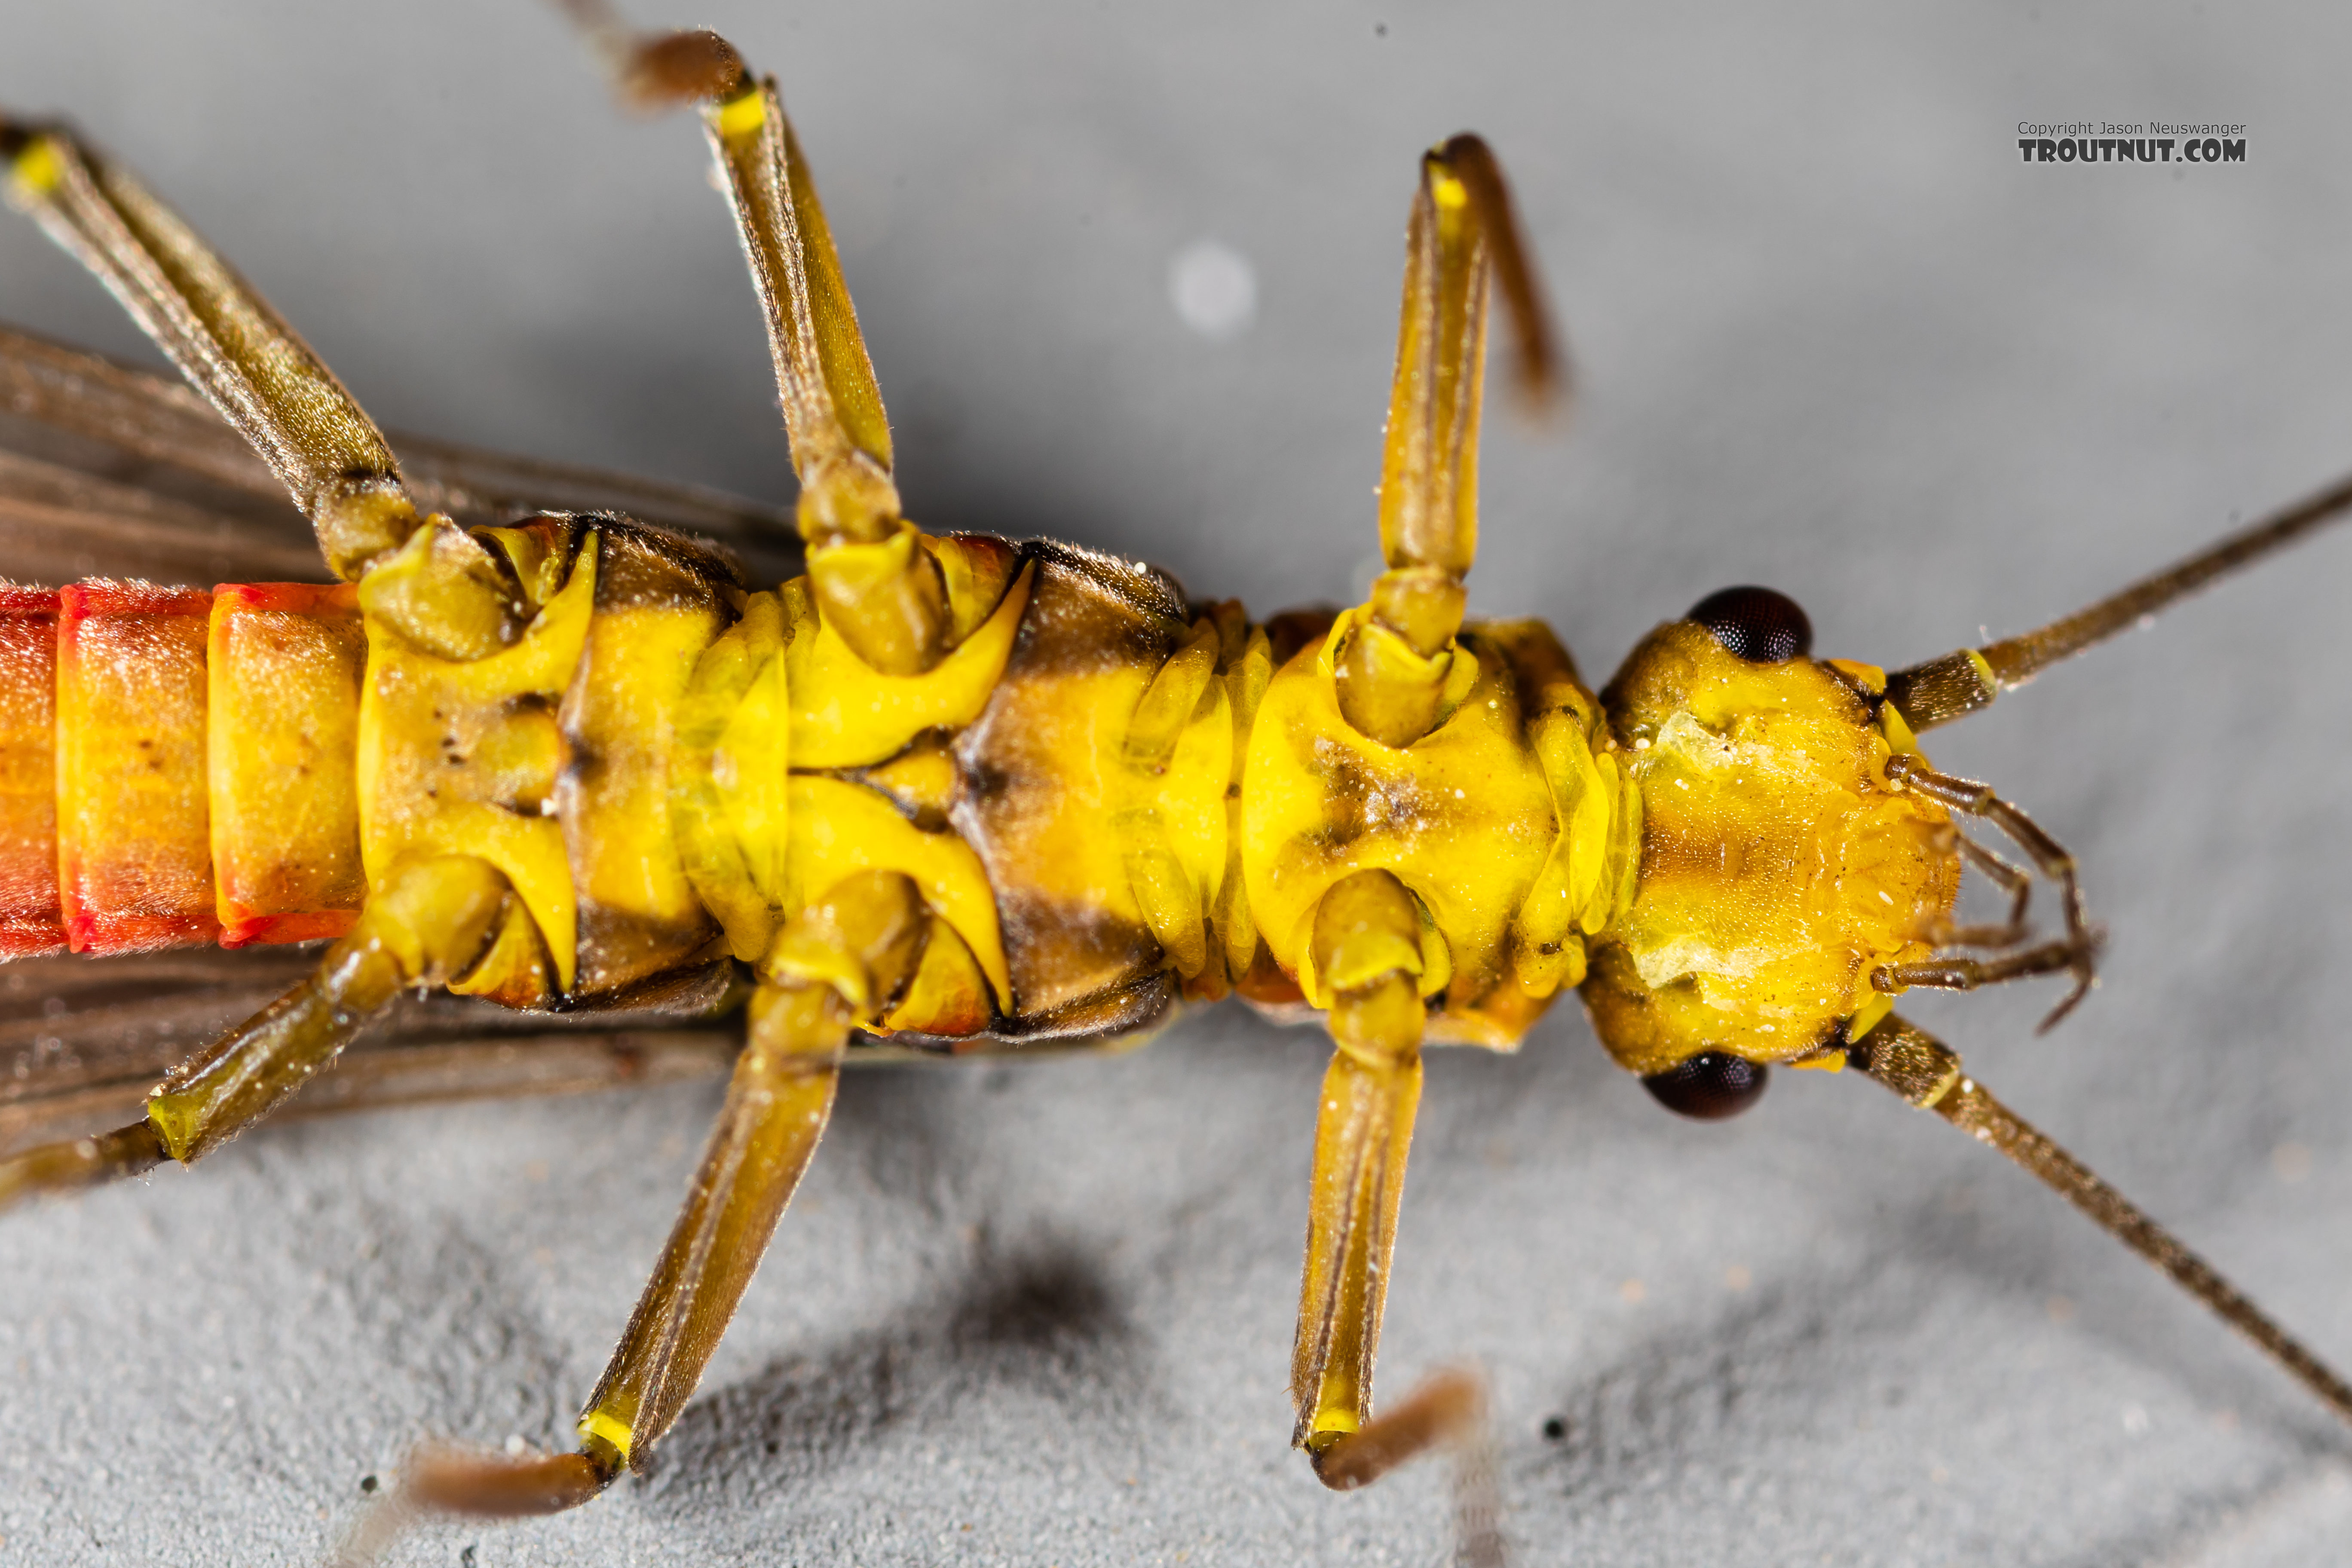 Female Sweltsa (Sallflies) Stonefly Adult from the Madison River in Montana